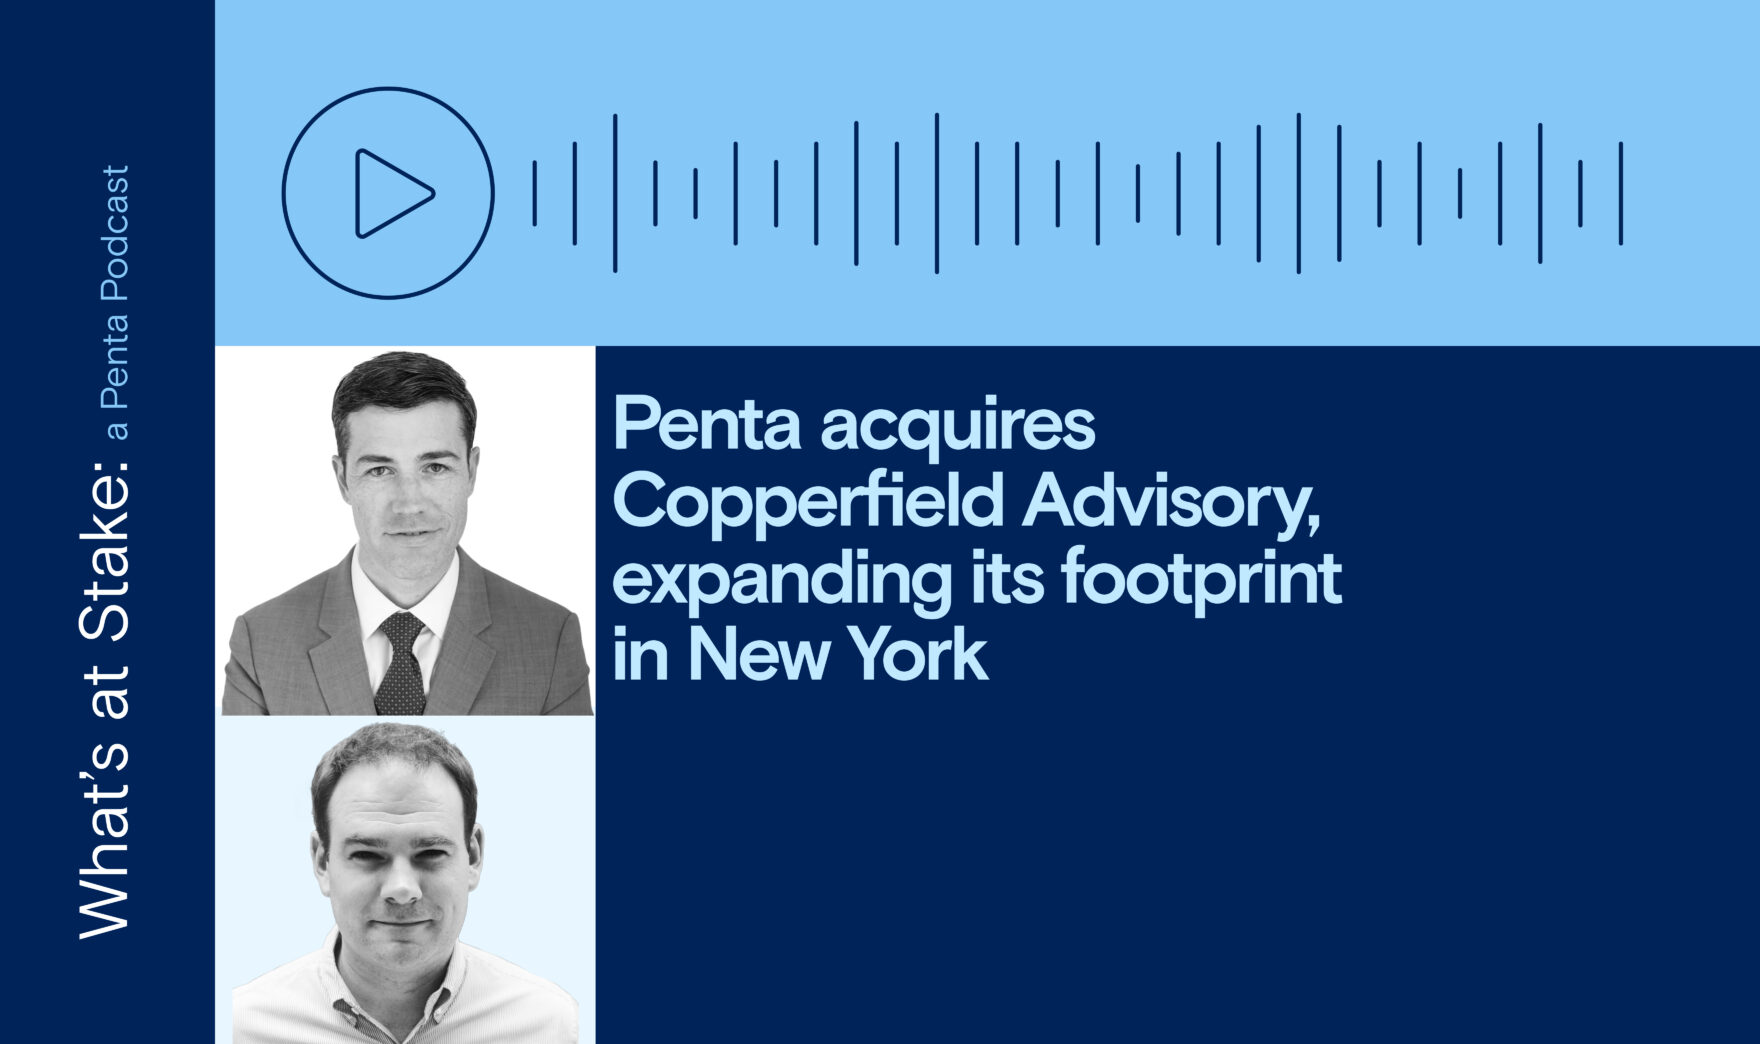 Penta acquires Copperfield Advisory, expanding its footprint in New York